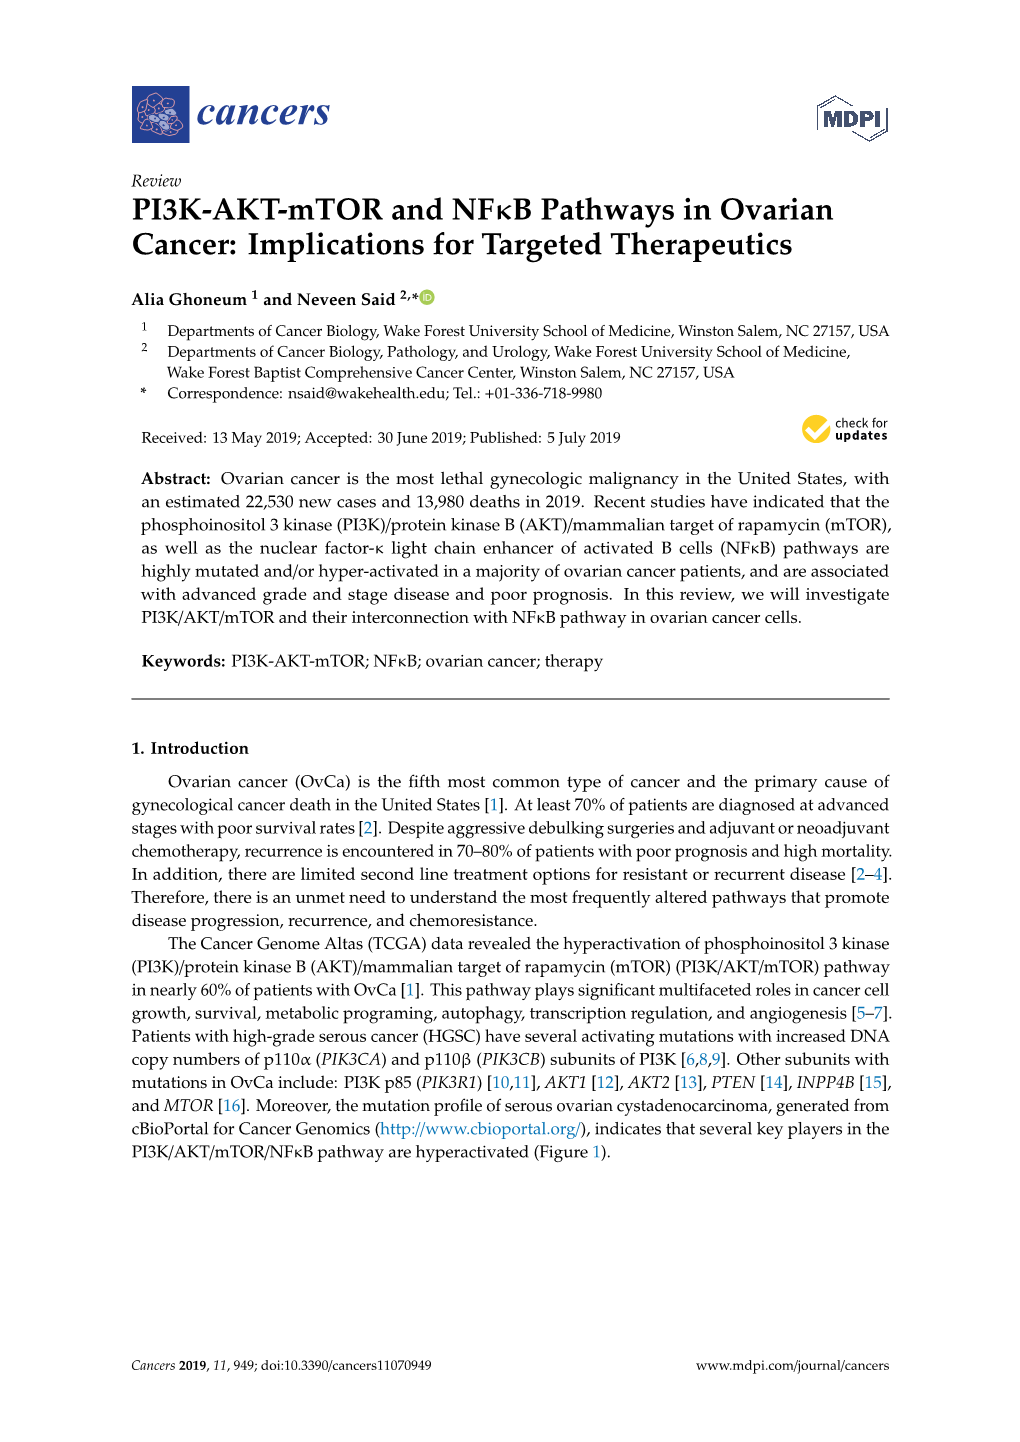 PI3K-AKT-Mtor and Nfκb Pathways in Ovarian Cancer: Implications for Targeted Therapeutics